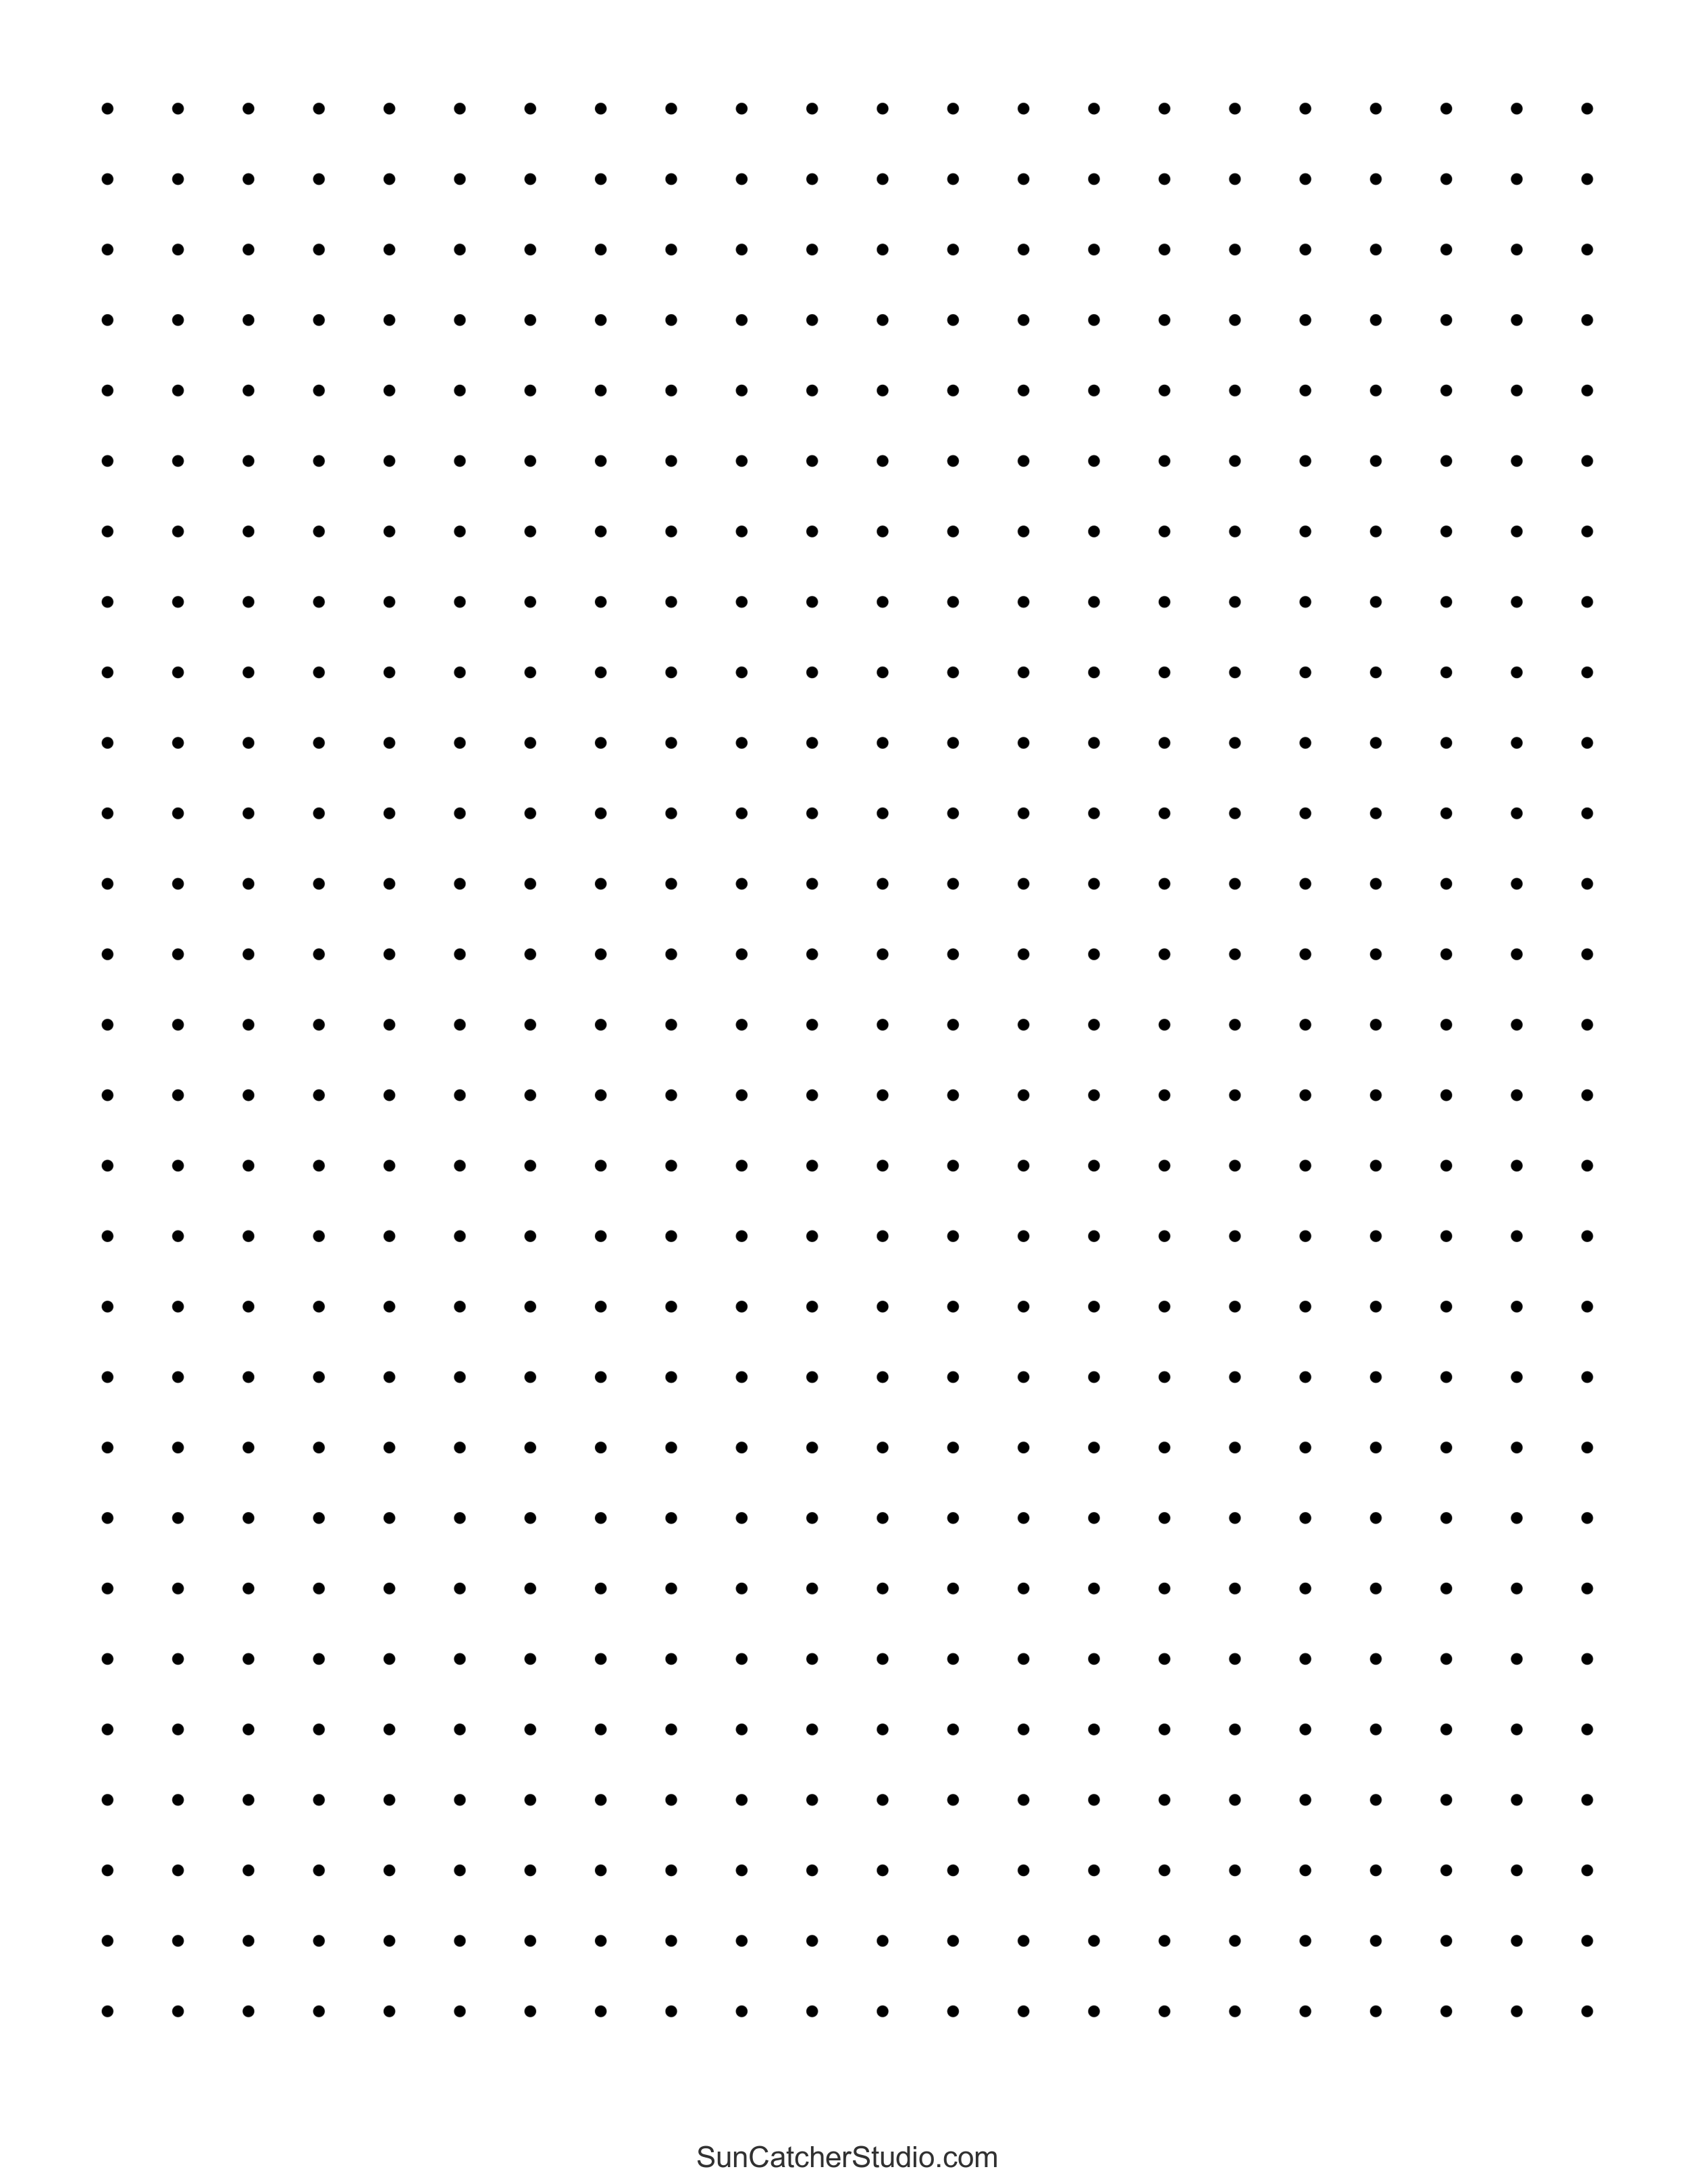 Printable Dot Paper with six dots per inch spacing on letter-sized paper